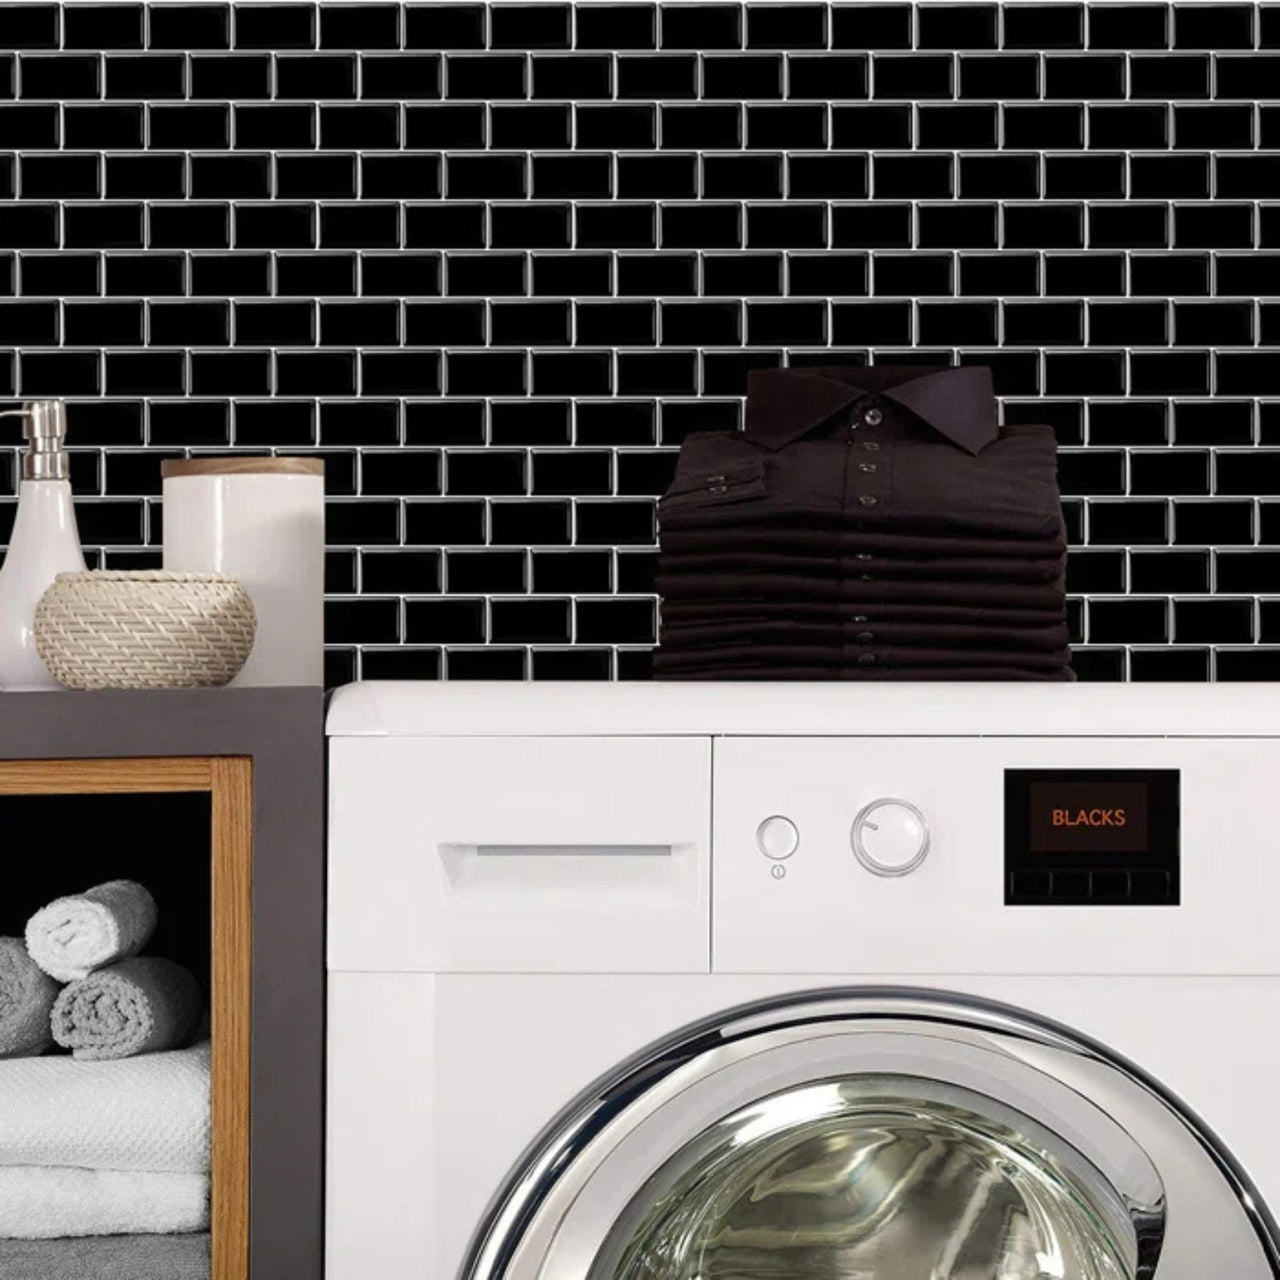 Black subway peel and stick vinyl wall tiles with white grout in laundry room